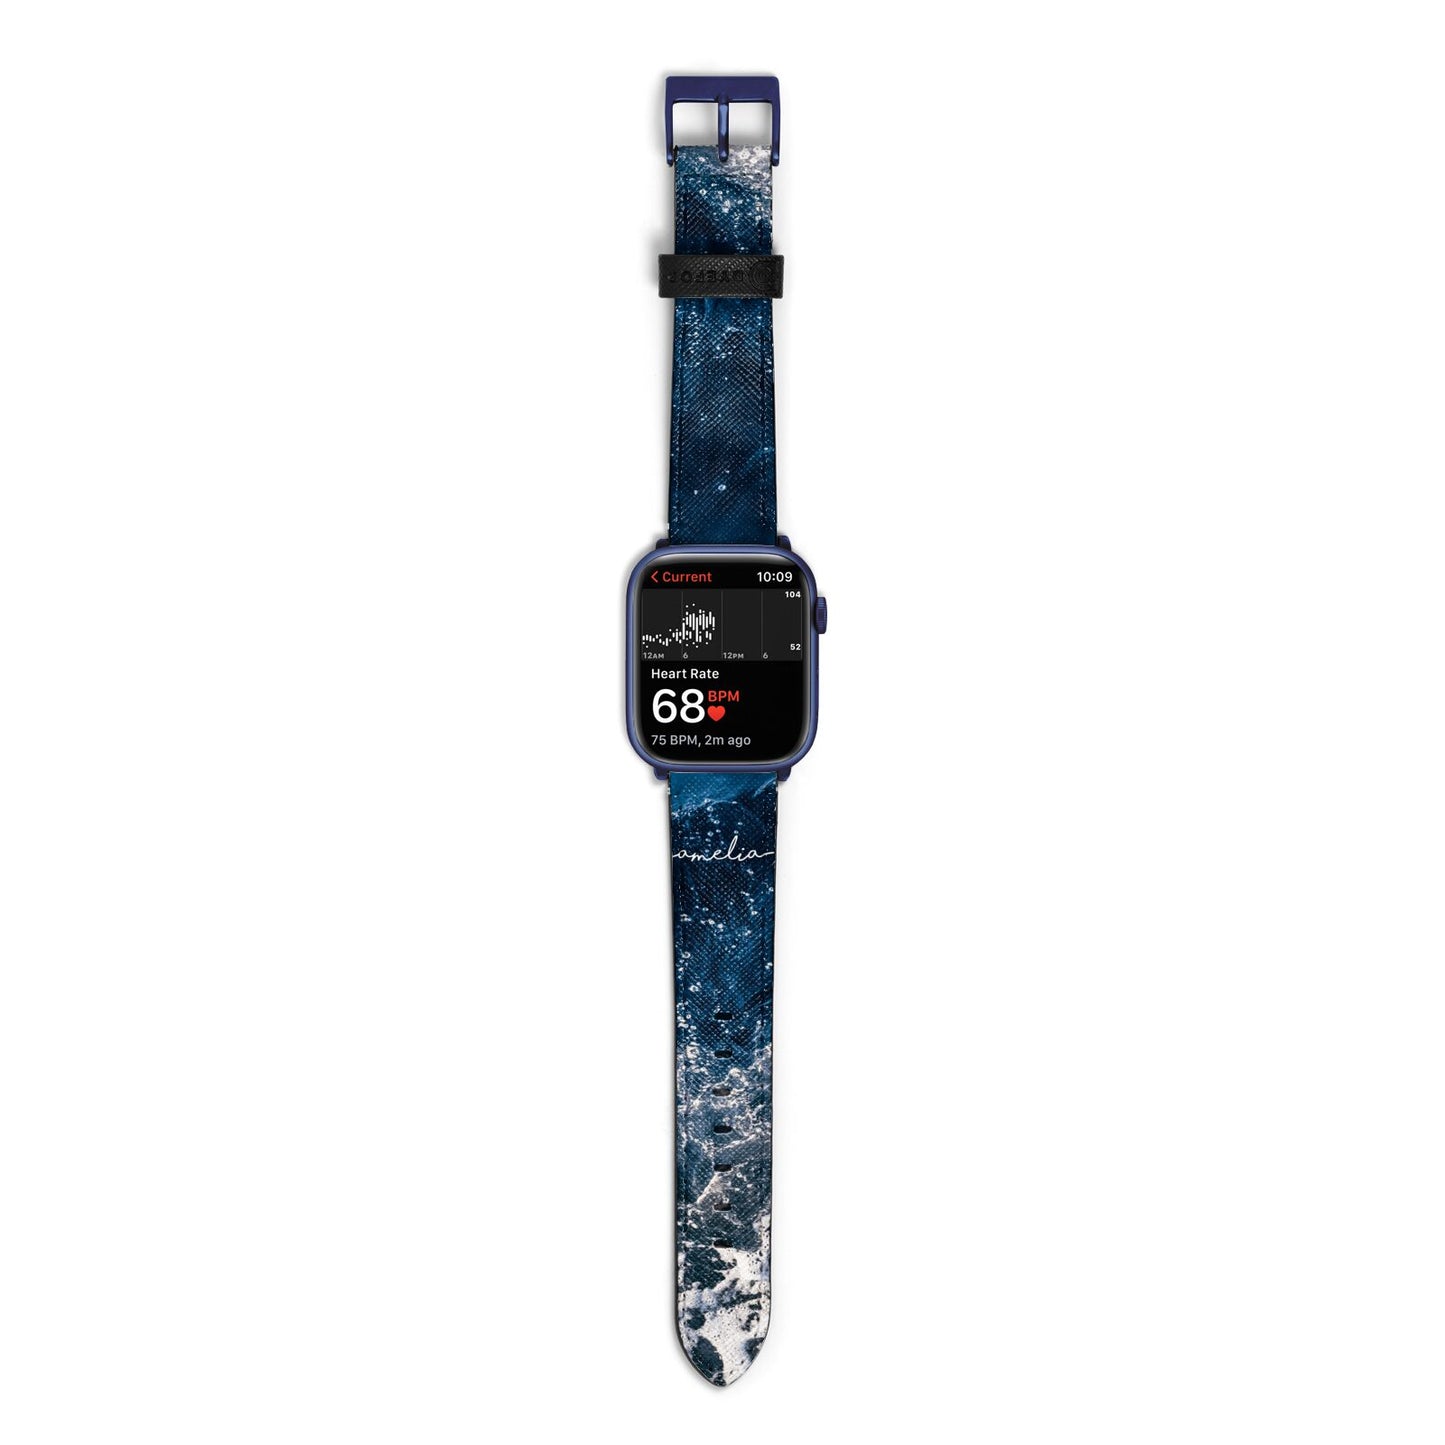 Custom Sea Apple Watch Strap Size 38mm with Blue Hardware